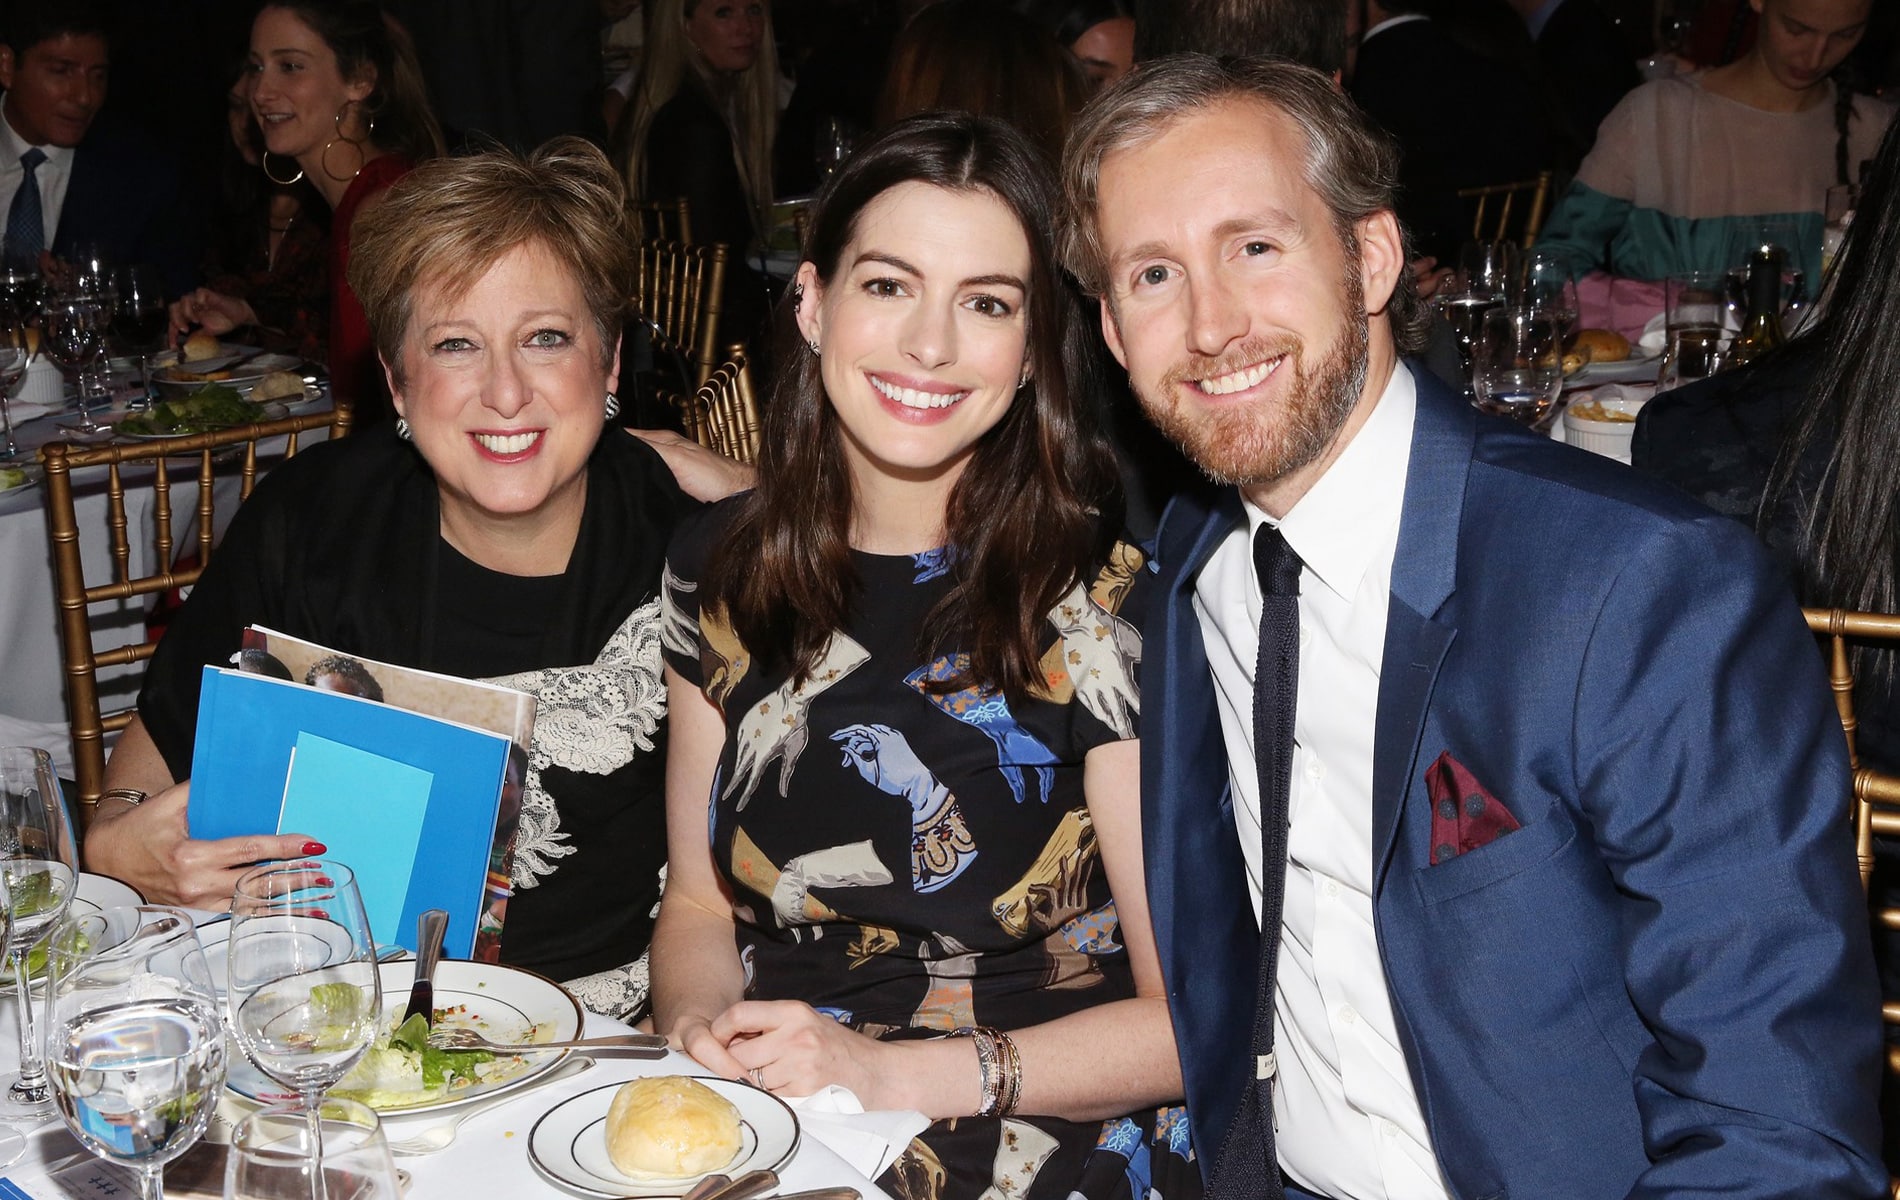 Caryl M. Stern, Anne Hathaway, and Adam Shulman attend the World of Children Awards Ceremony in New York City